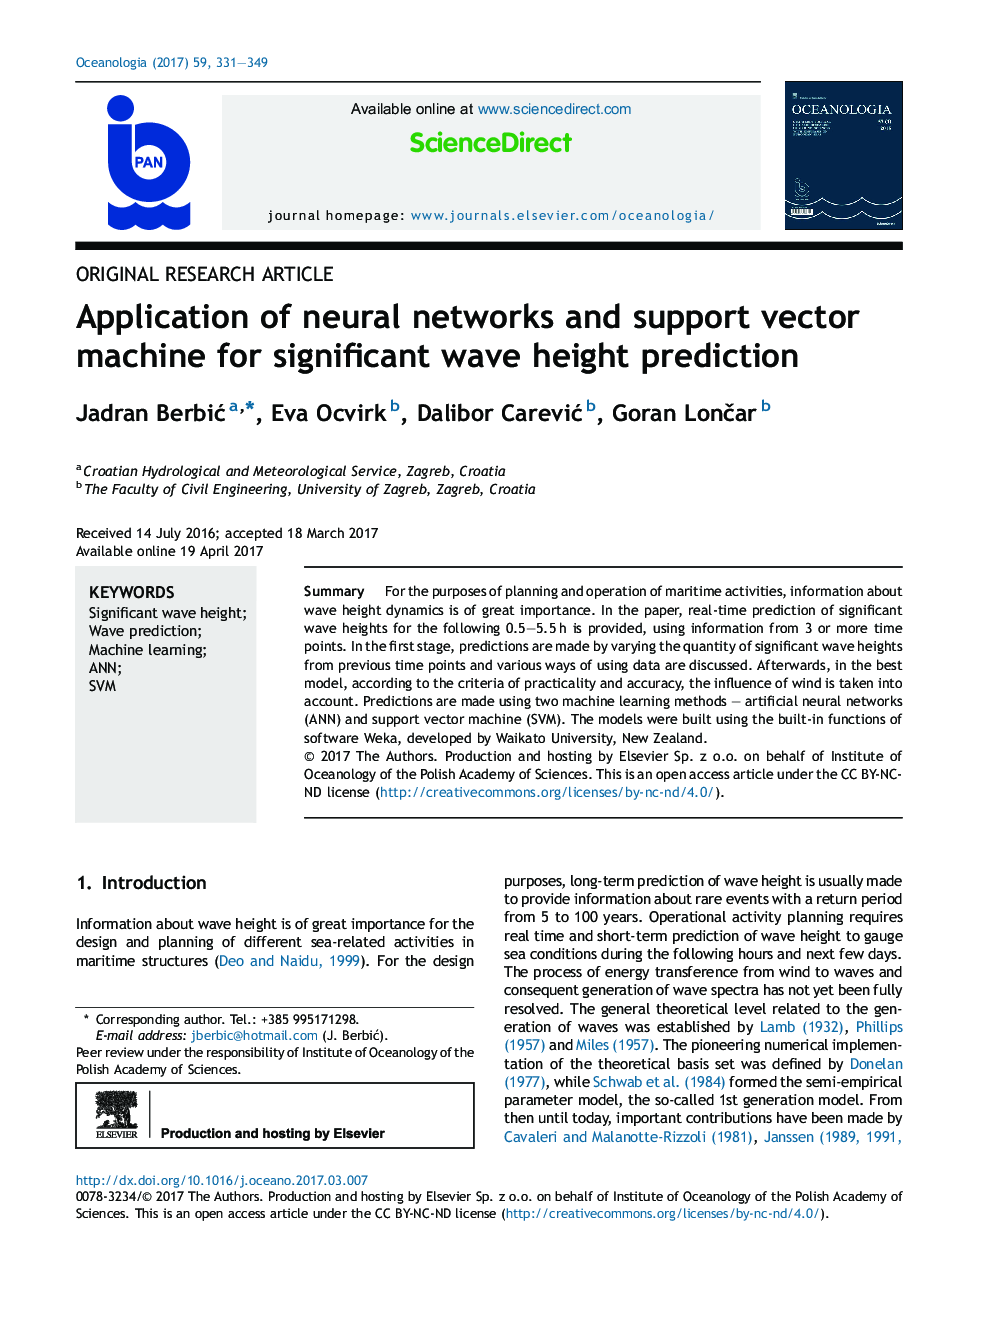 Application of neural networks and support vector machine for significant wave height prediction